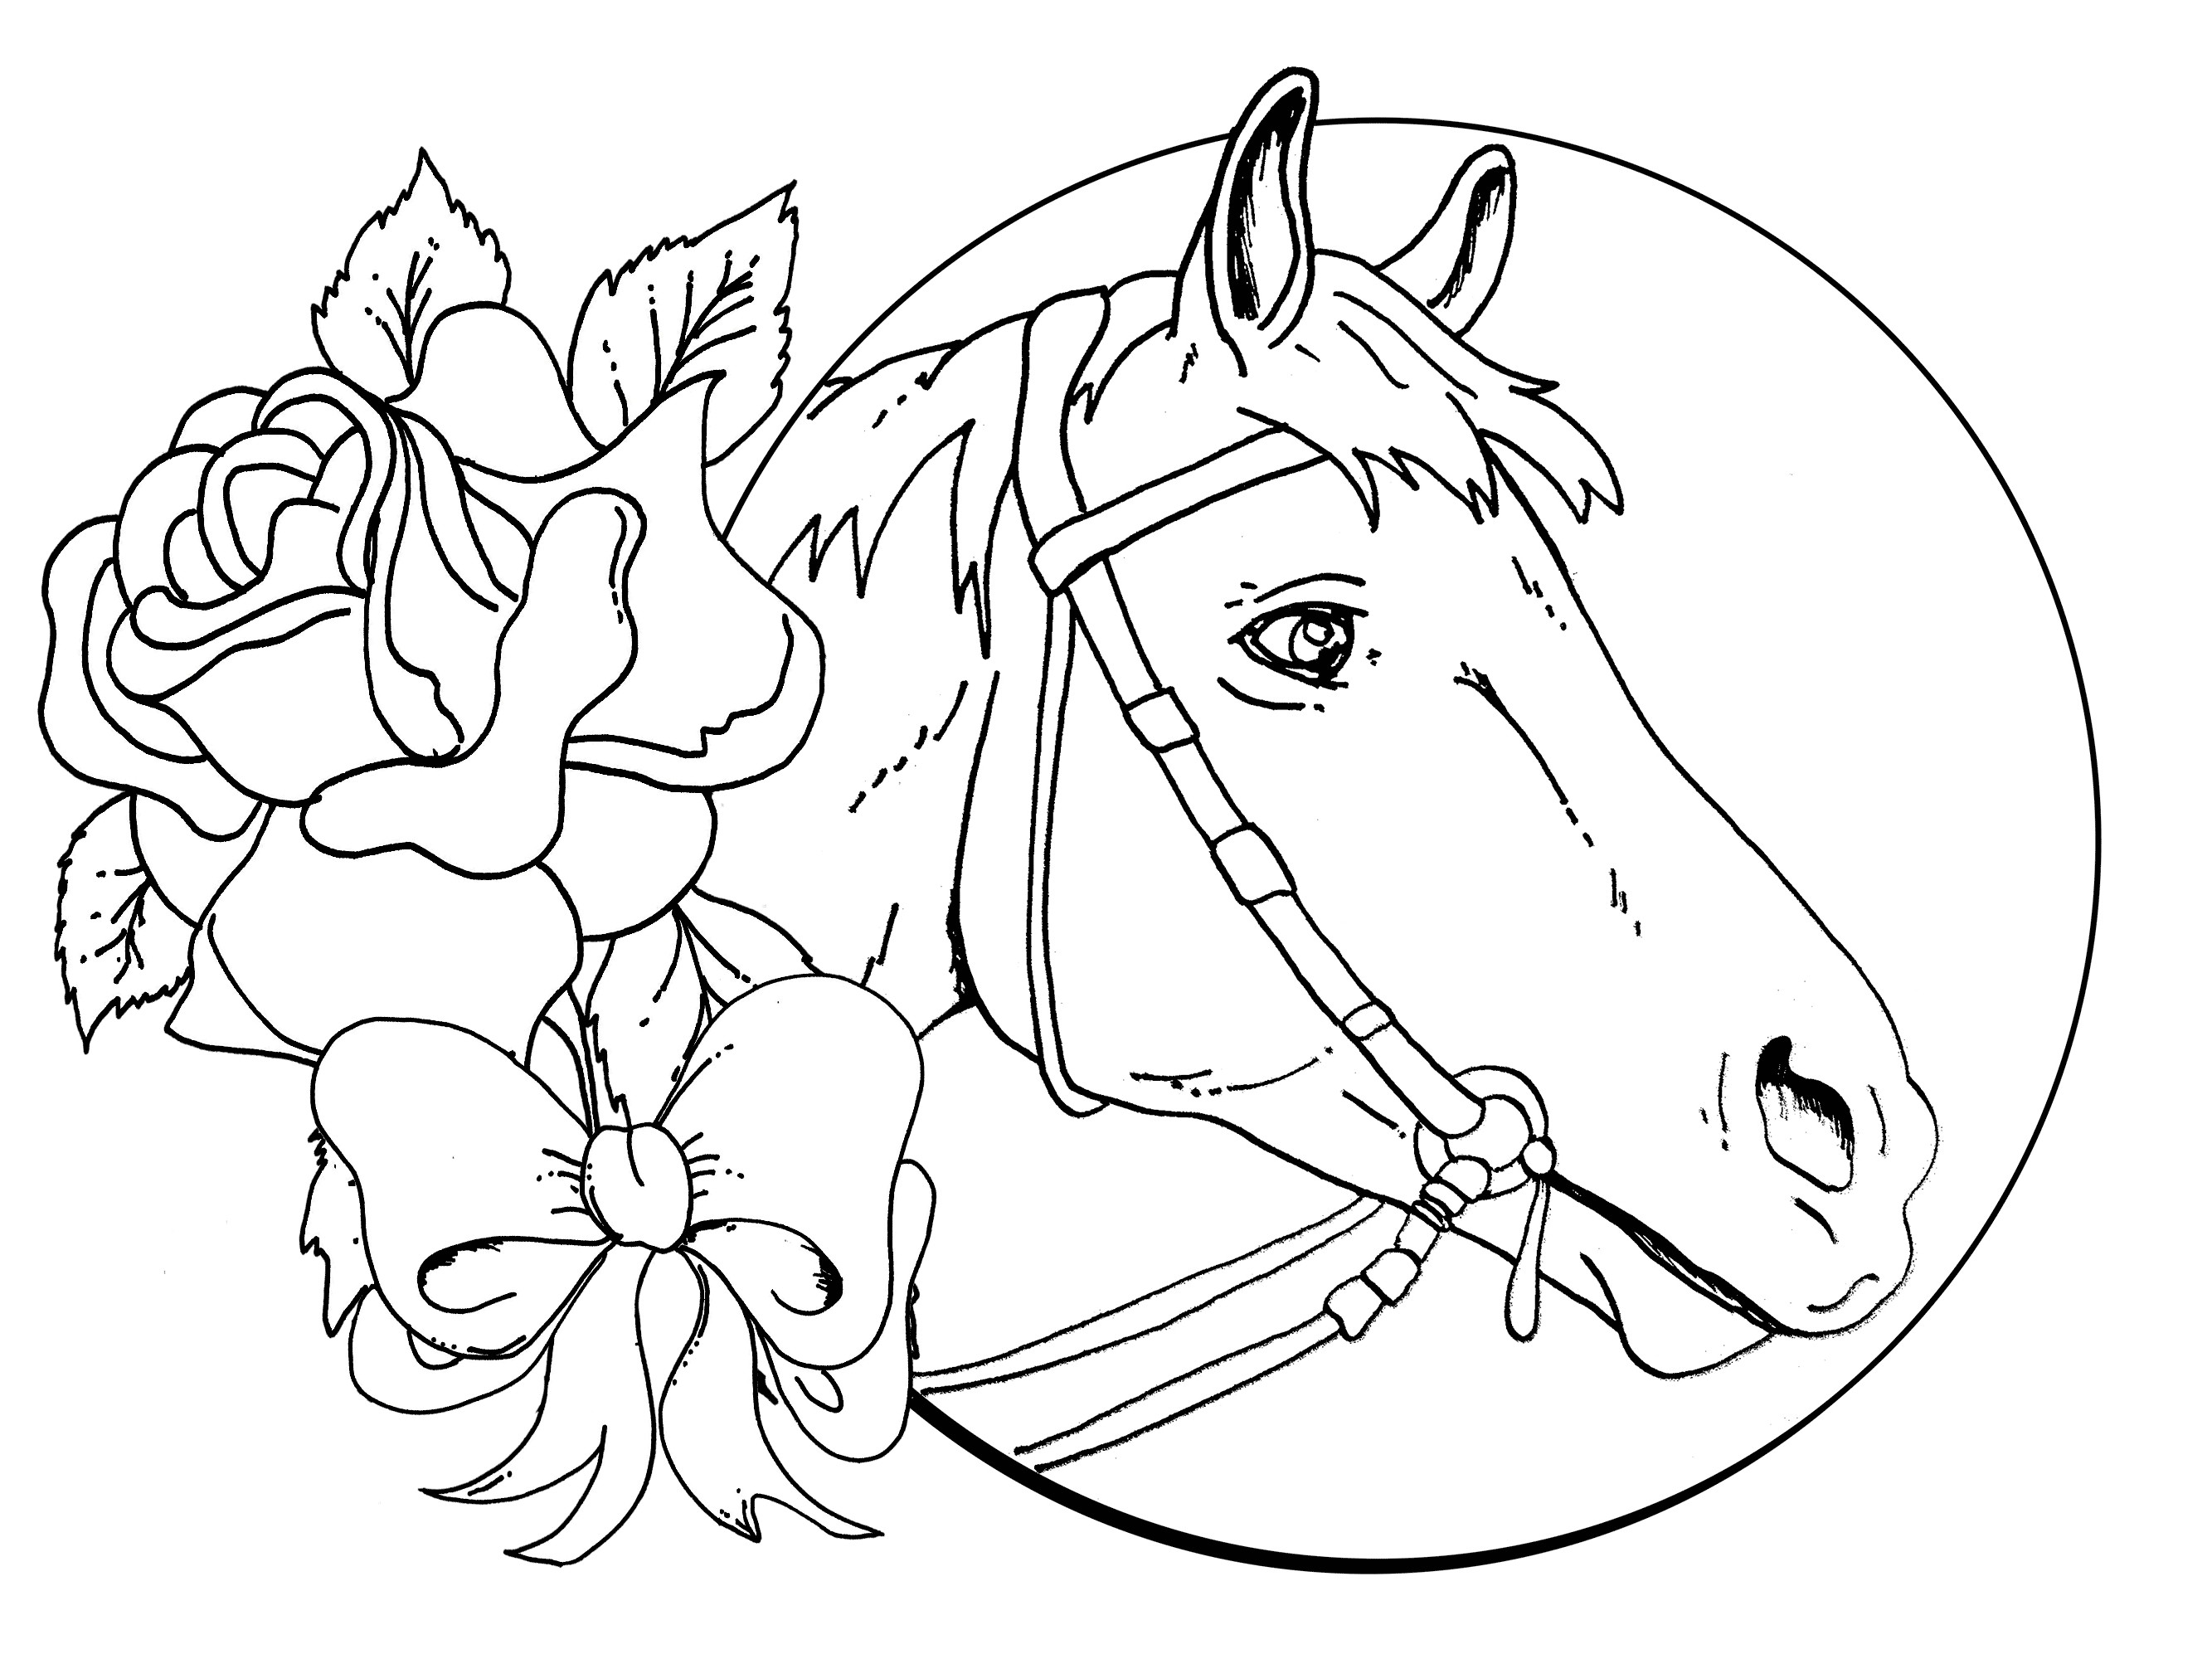 Awesome Horse Head Coloring Pages To Print 96 For Your with Horse Head Coloring Pages To